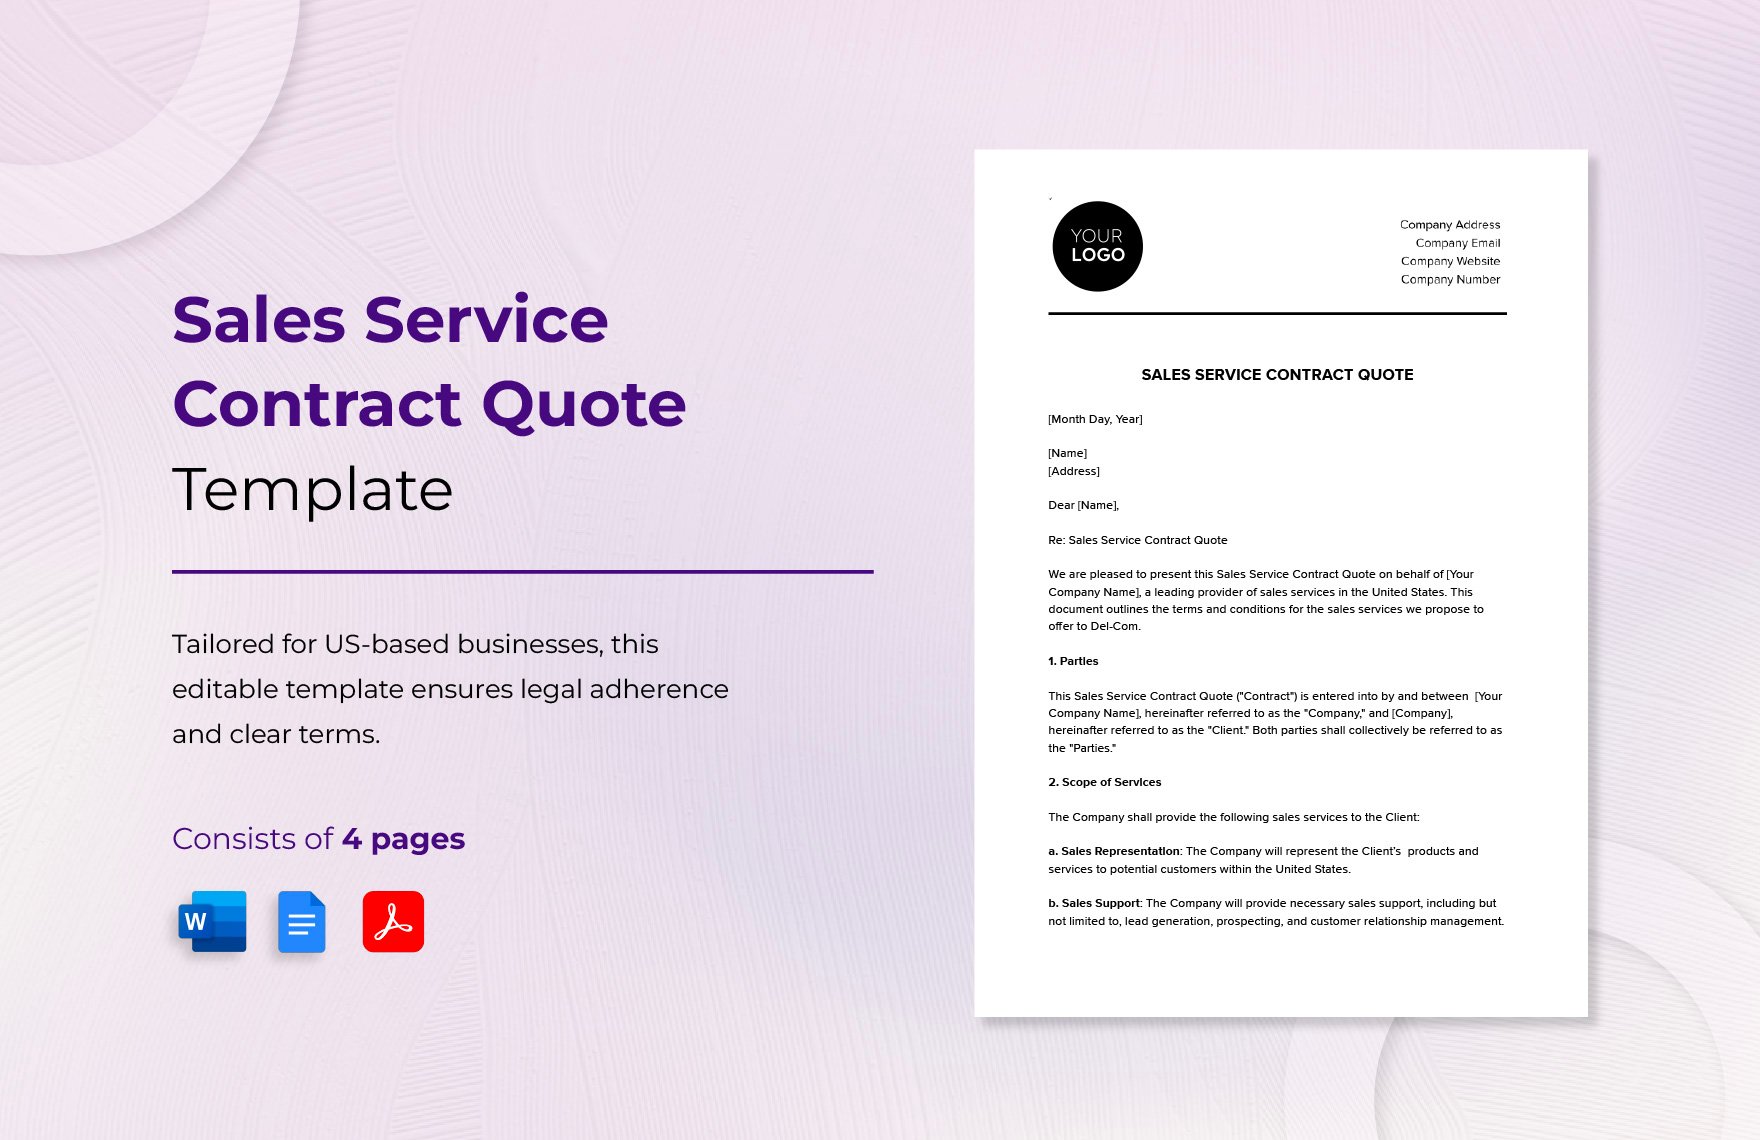 Sales Service Contract Quote Template in Word, Google Docs, PDF